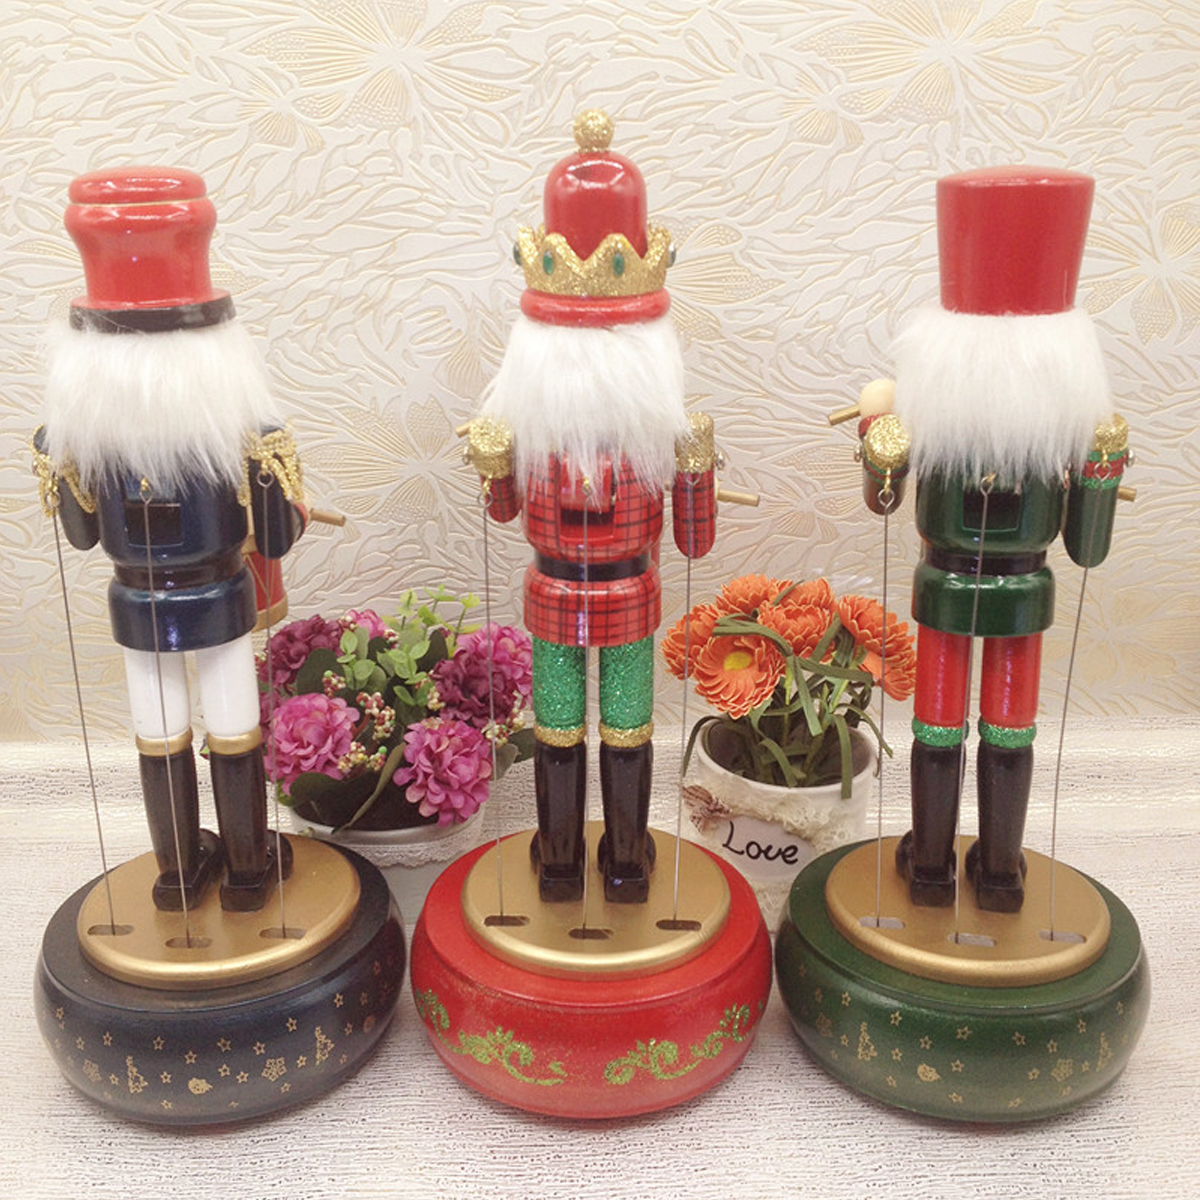 32CM-Wooden-Guard-Nutcracker-Soldier-Toy-Music-Box-Christmas-Decorations-Xmas-Gift-1605612-3